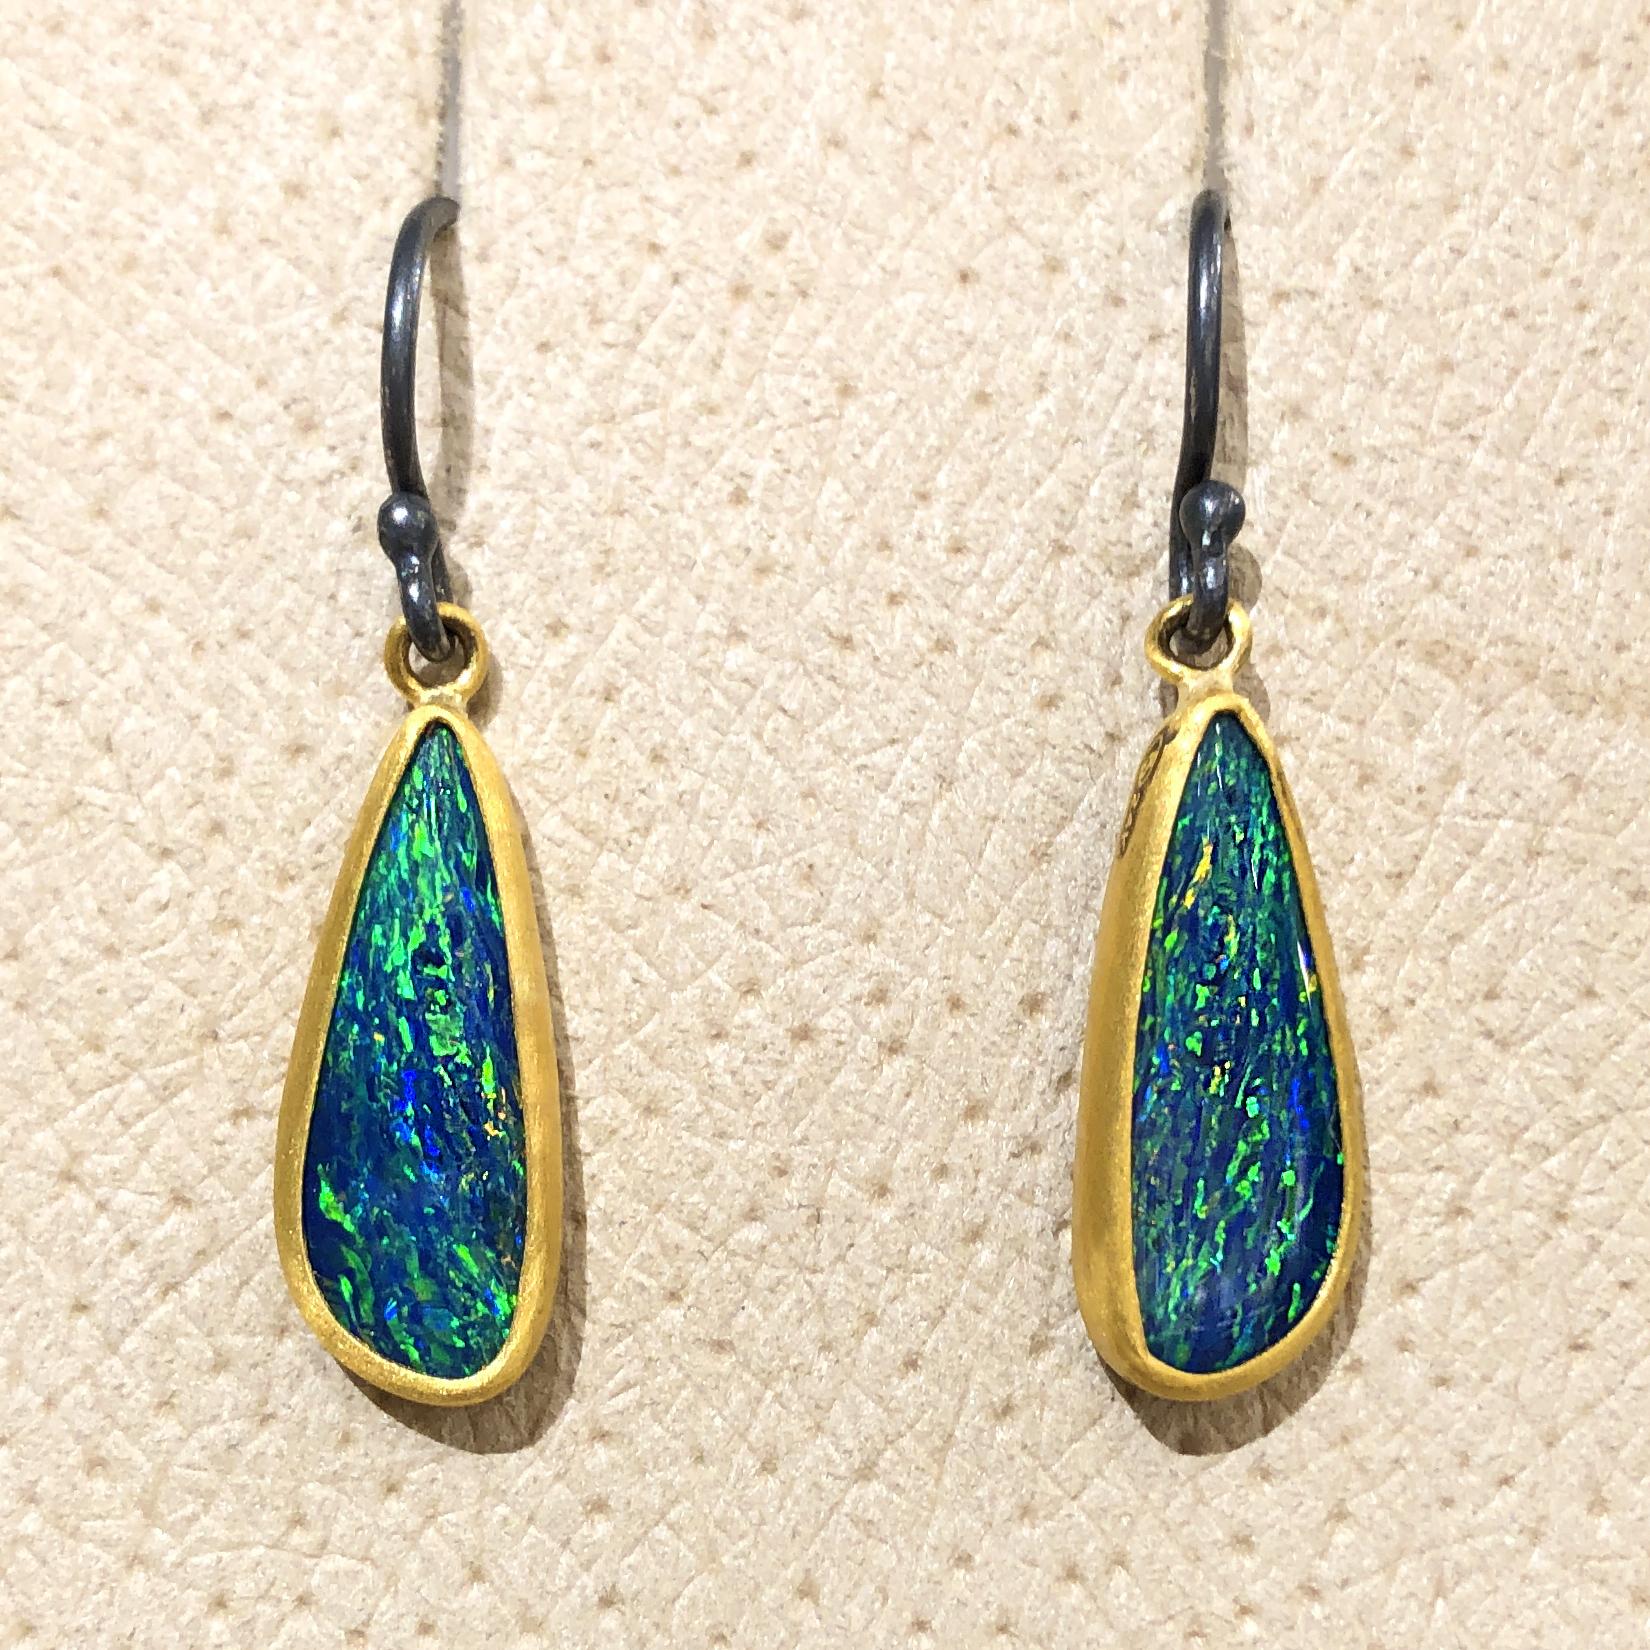 Opal Doublet Dangle Drop Earrings handcrafted by acclaimed jewelry maker Lika Behar featuring a gorgeous matched pair of blue opal doublets with primary electric green flash complemented by oranges and reds, bezel-set in 24k gold and attached to